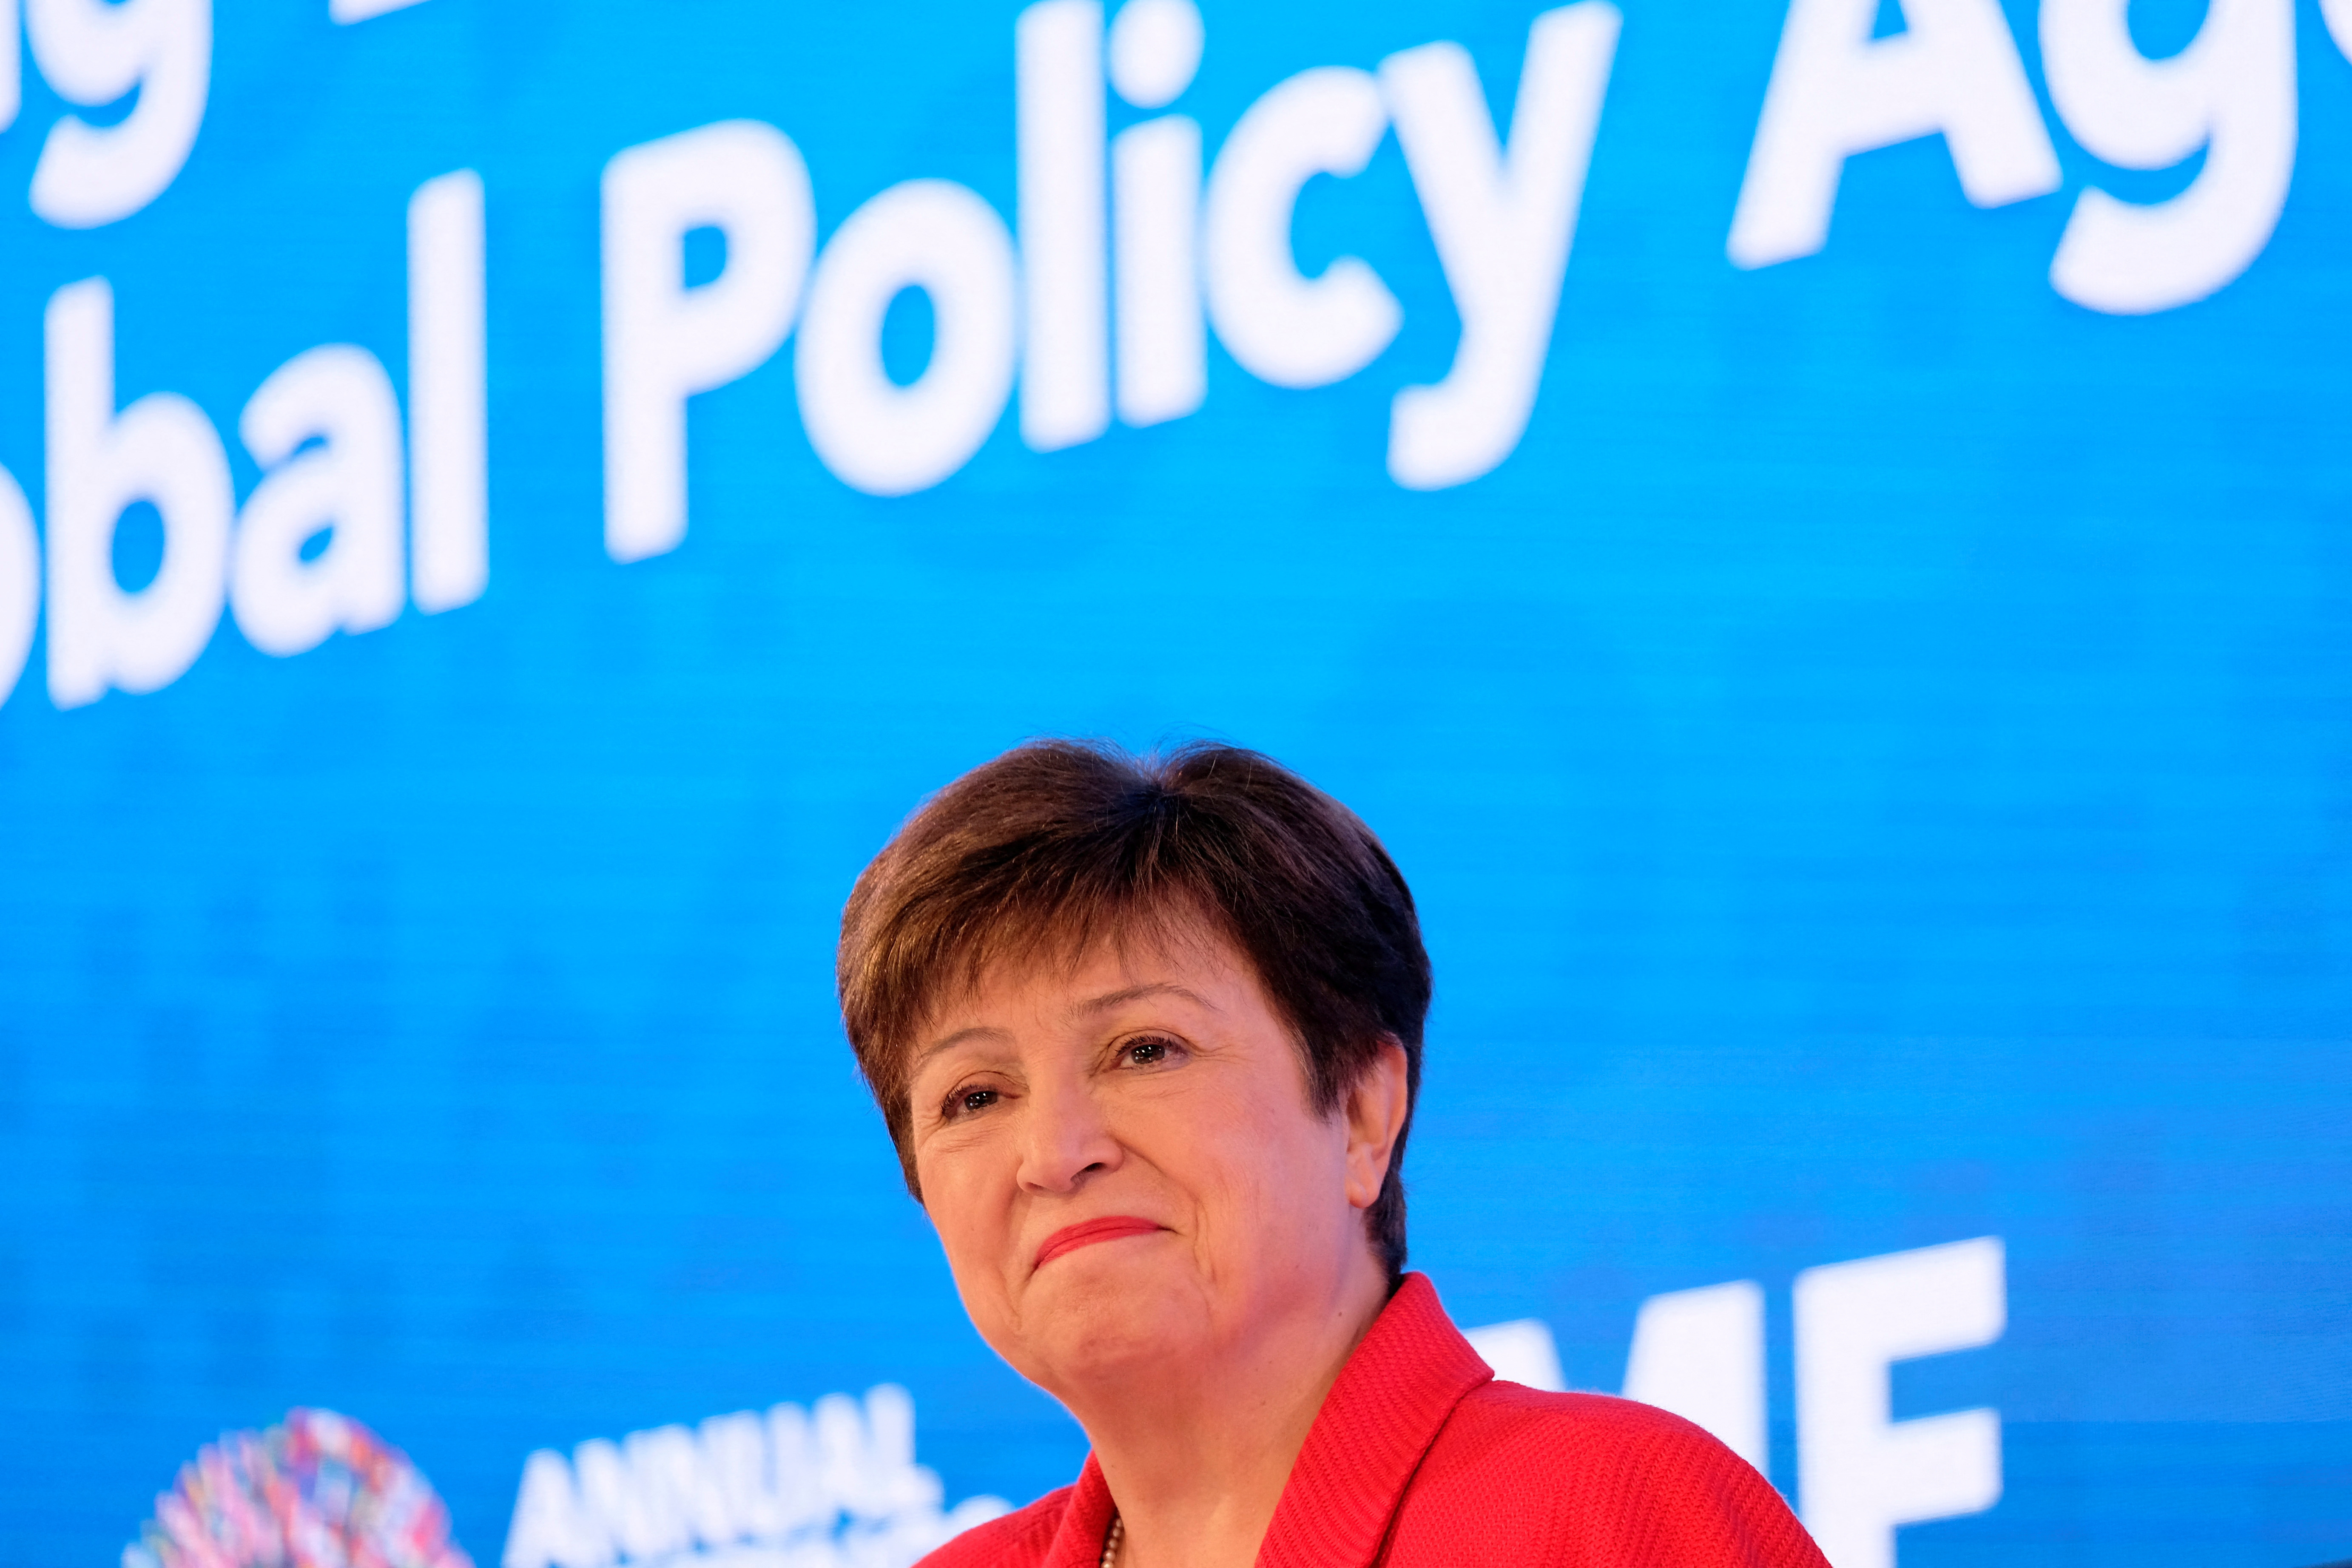 IMF managing director Kristalina Georgieva holds a news conference at the headquarters of the International Monetary Fund during the Annual Meetings of the IMF and World Bank in Washington